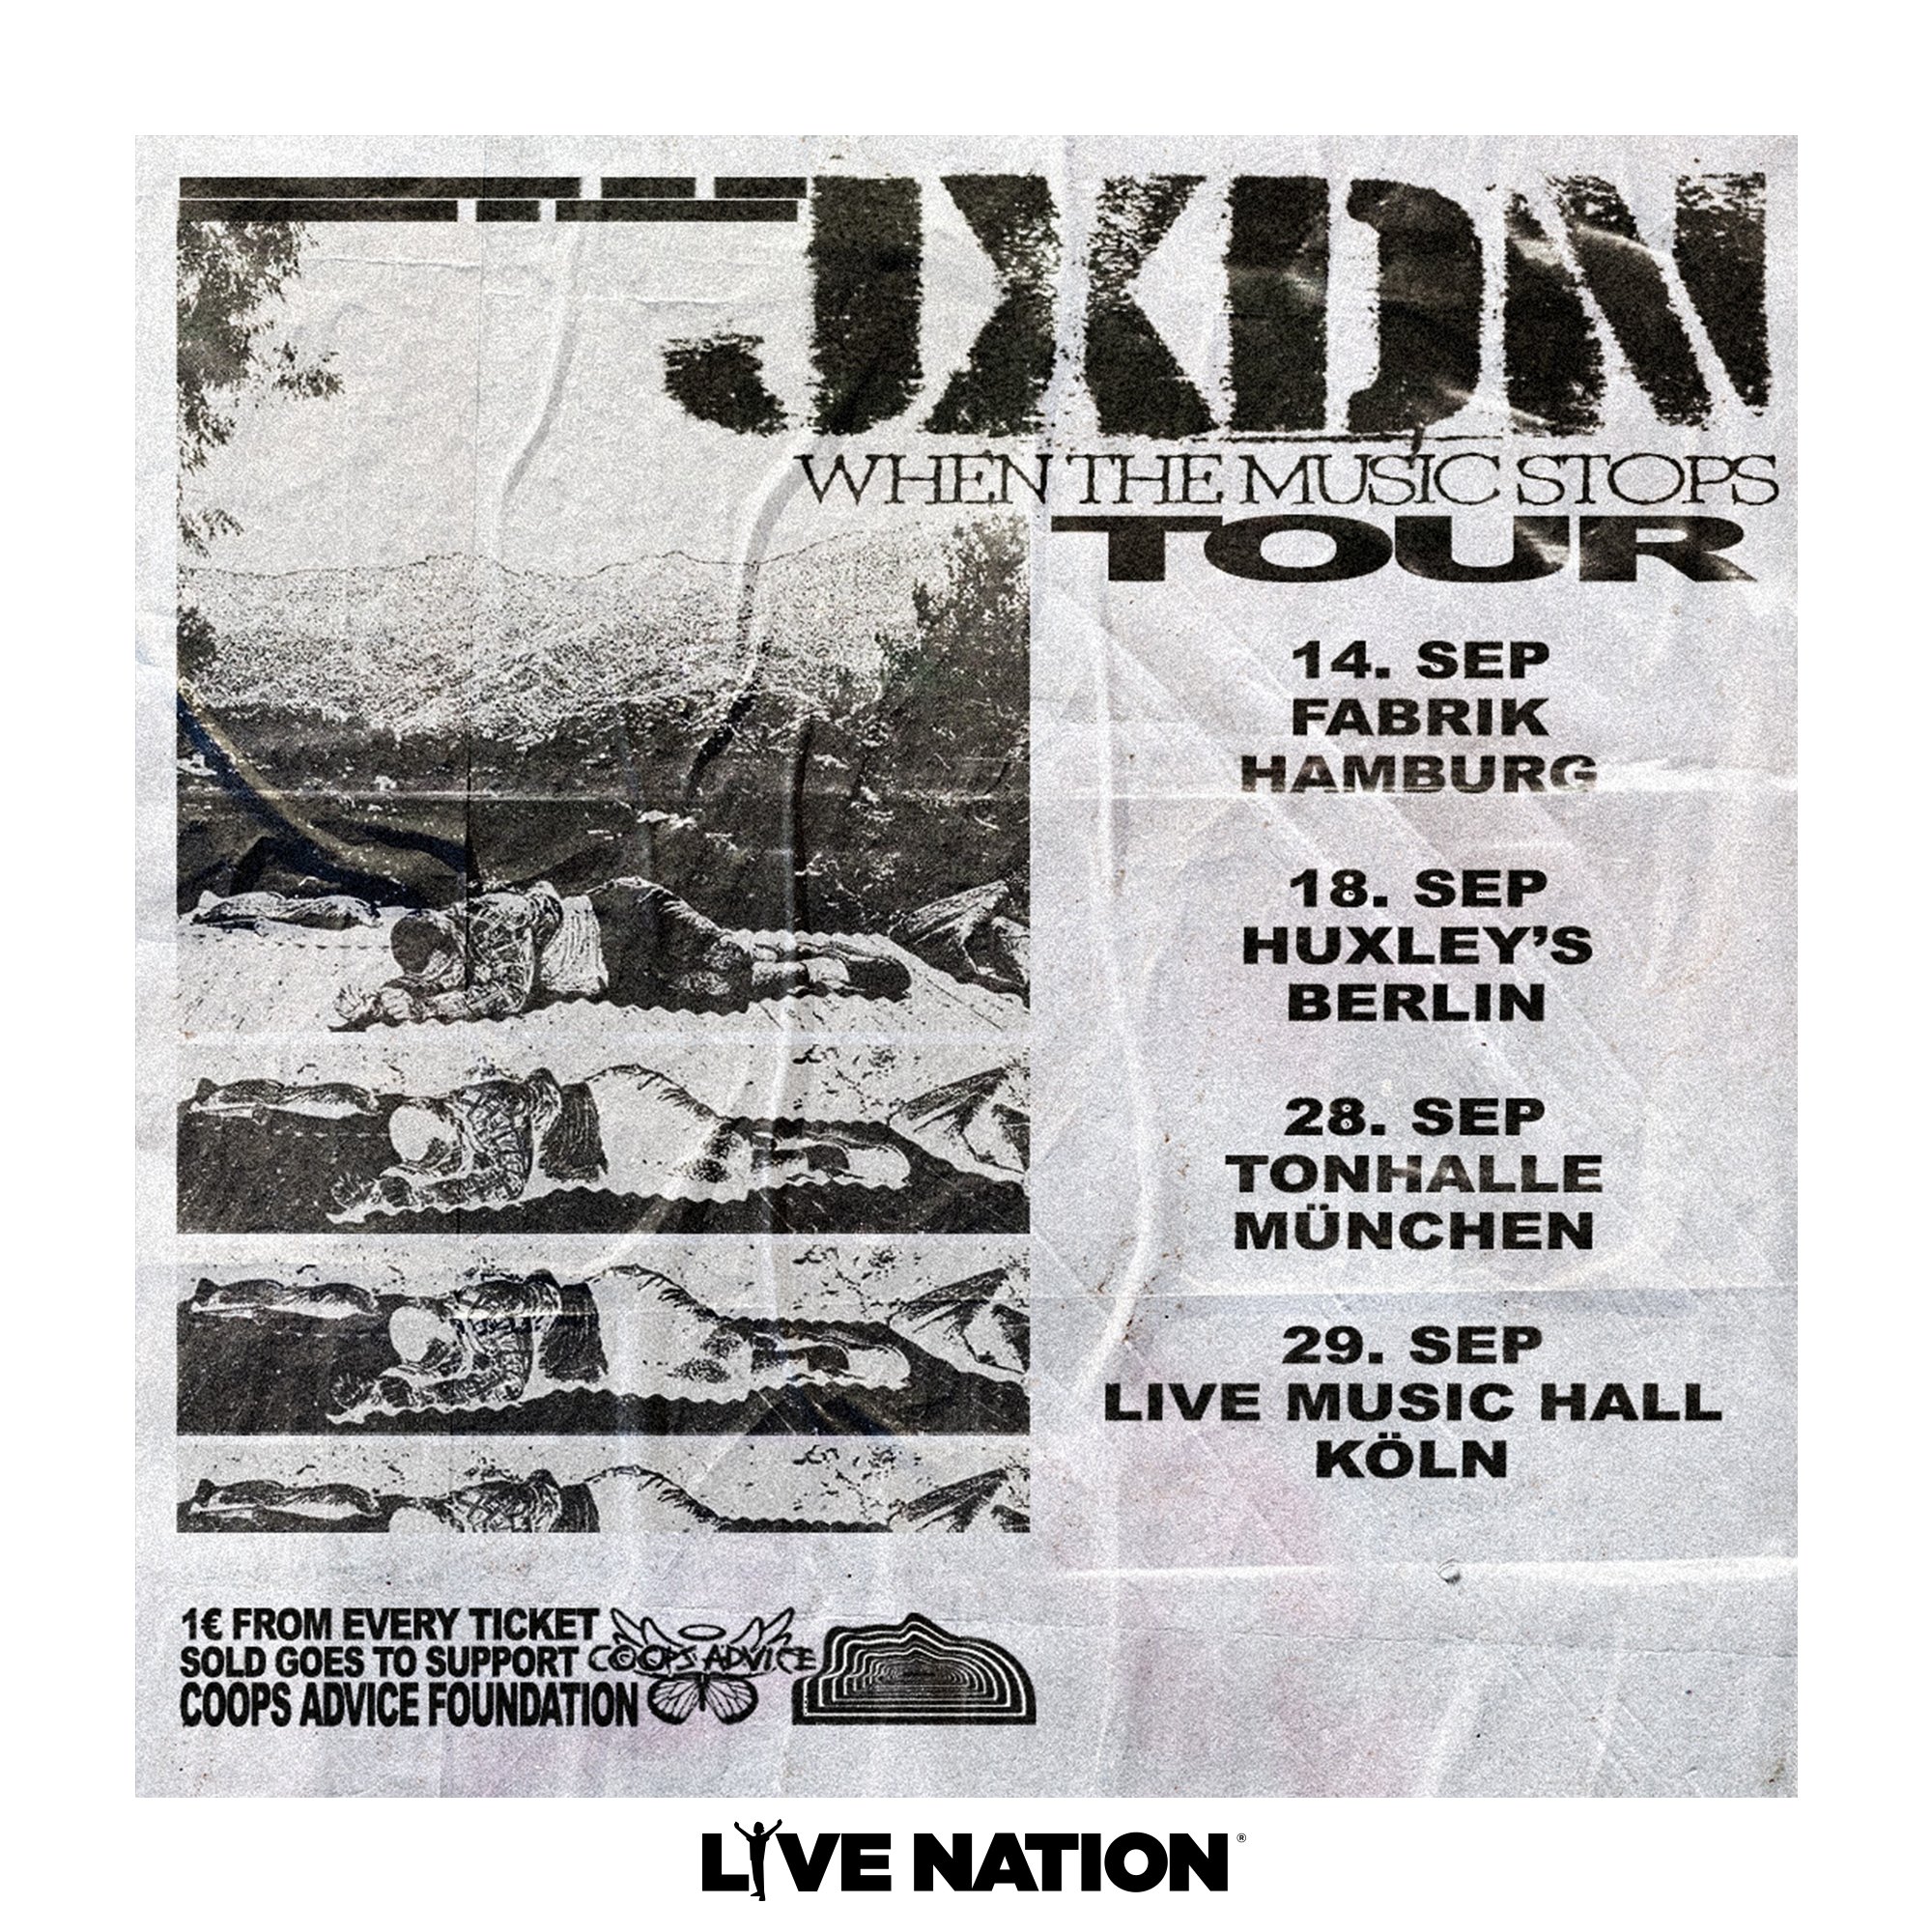 Jxdn - When The Music Stops Tour en Live Music Hall Tickets